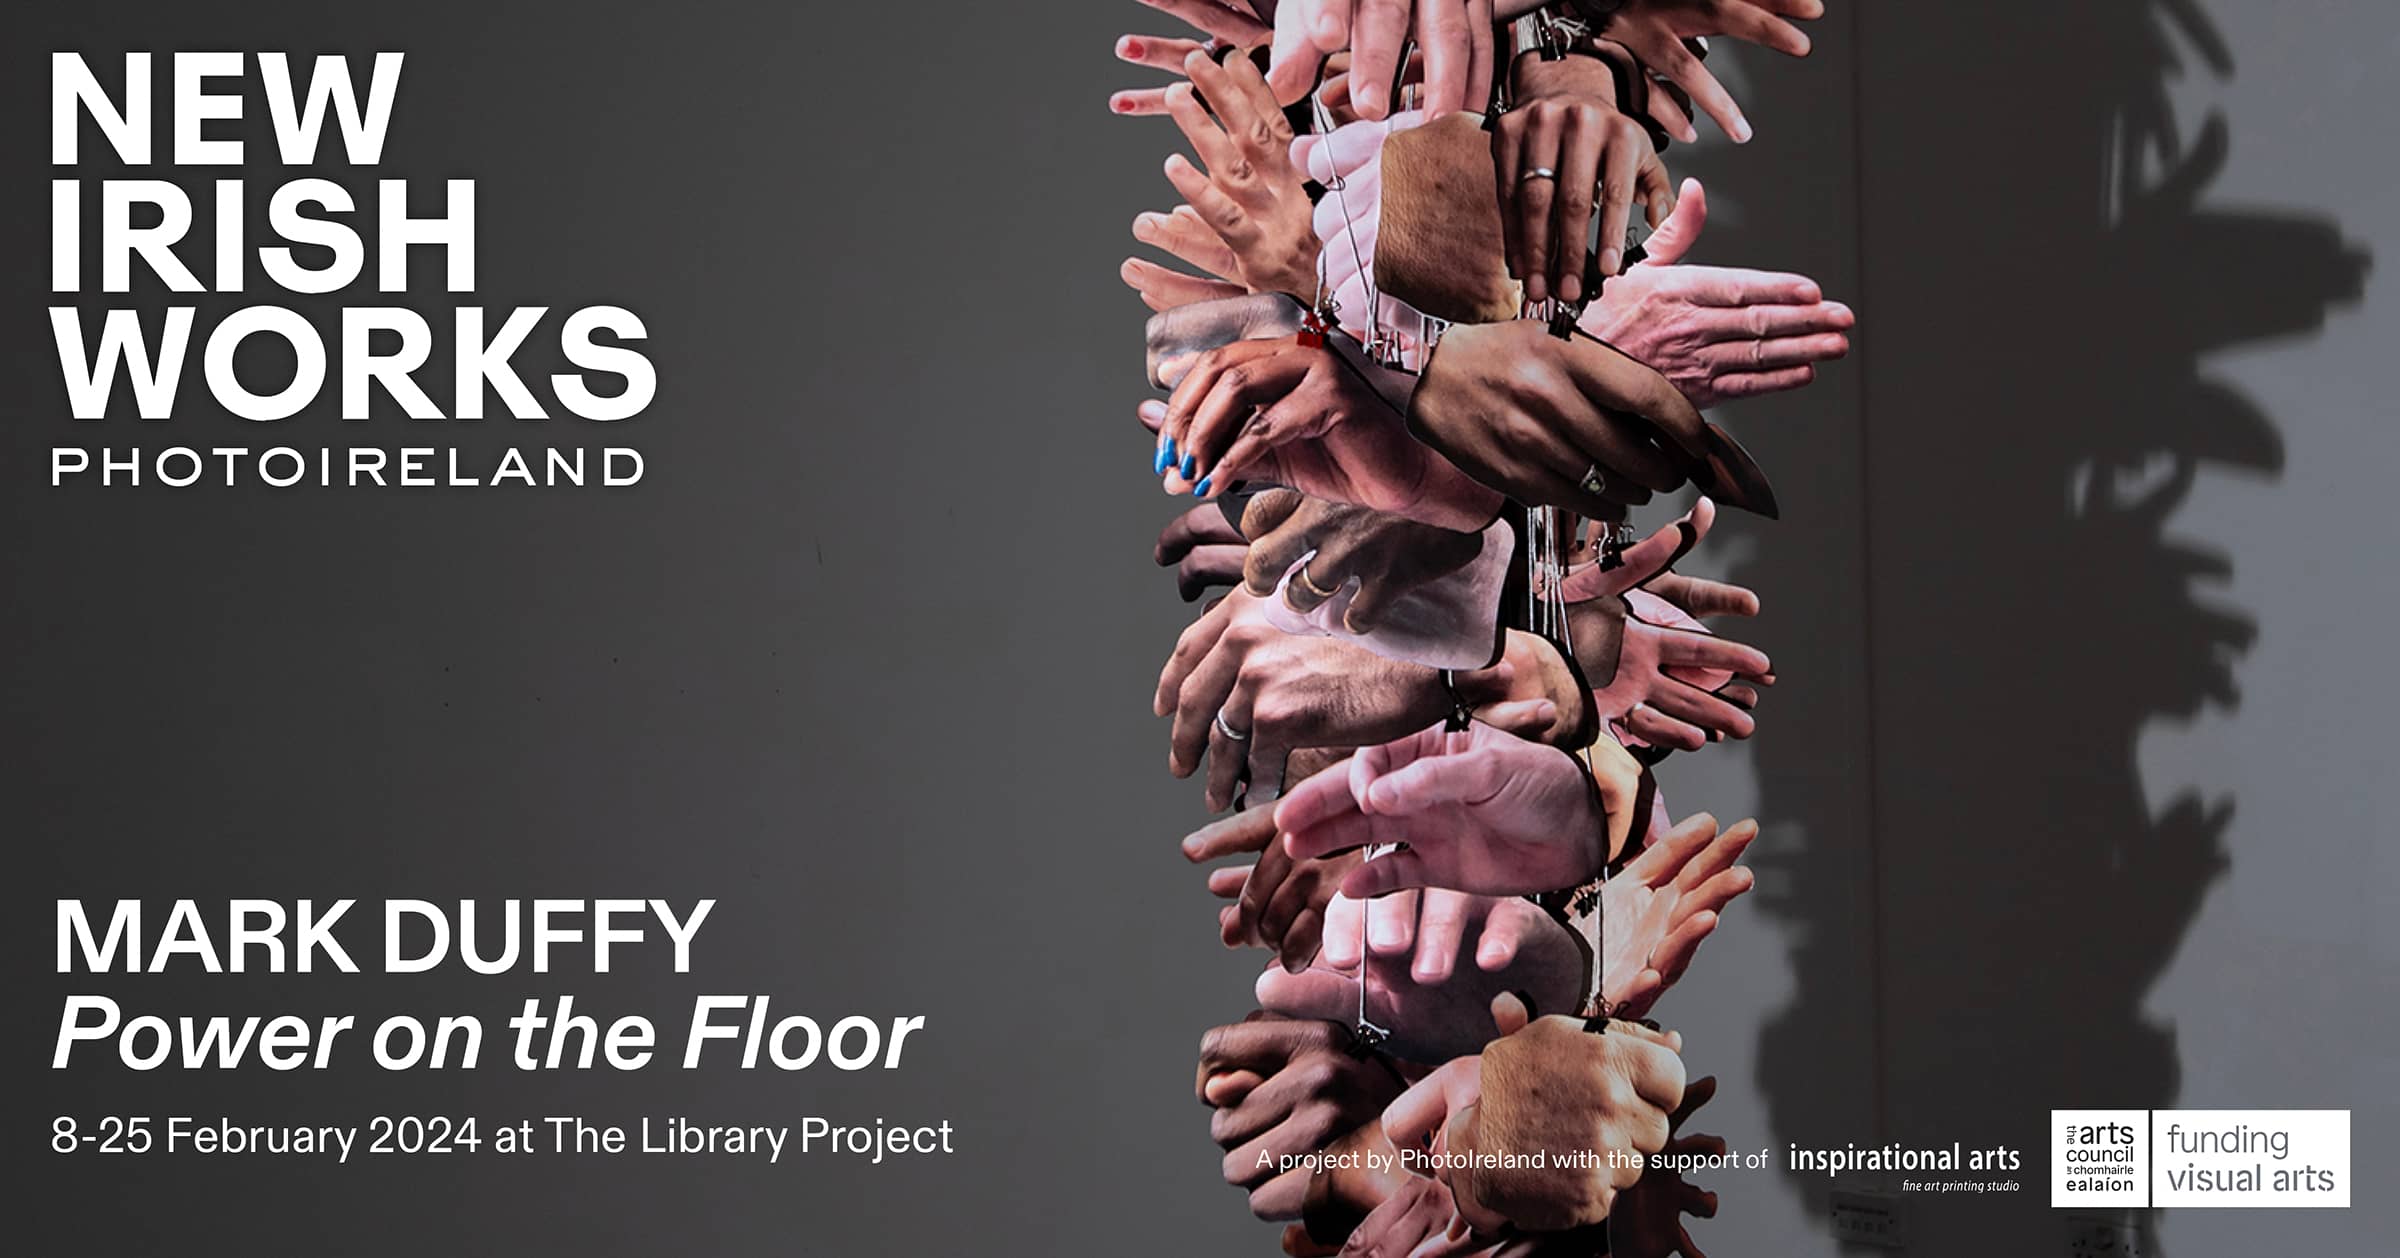 New Irish Works: Mark Duffy at The Library Project